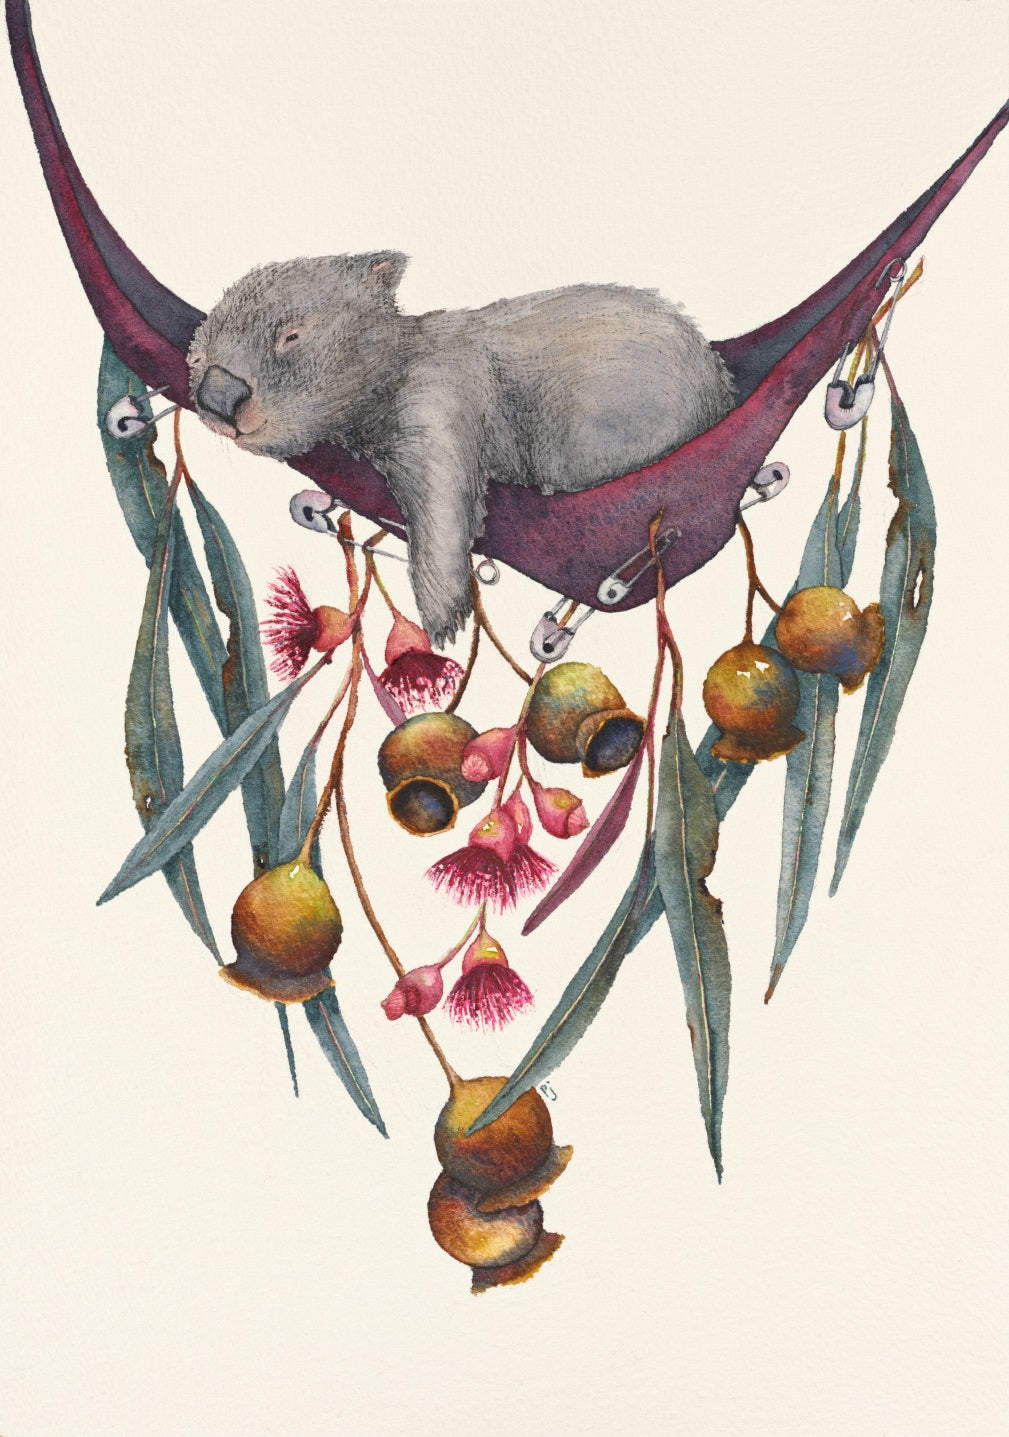 A relaxing wombat in a hammock decorated with gum leaves, nuts and flowers. The decorations roughly resemble the shape of Tasmania.